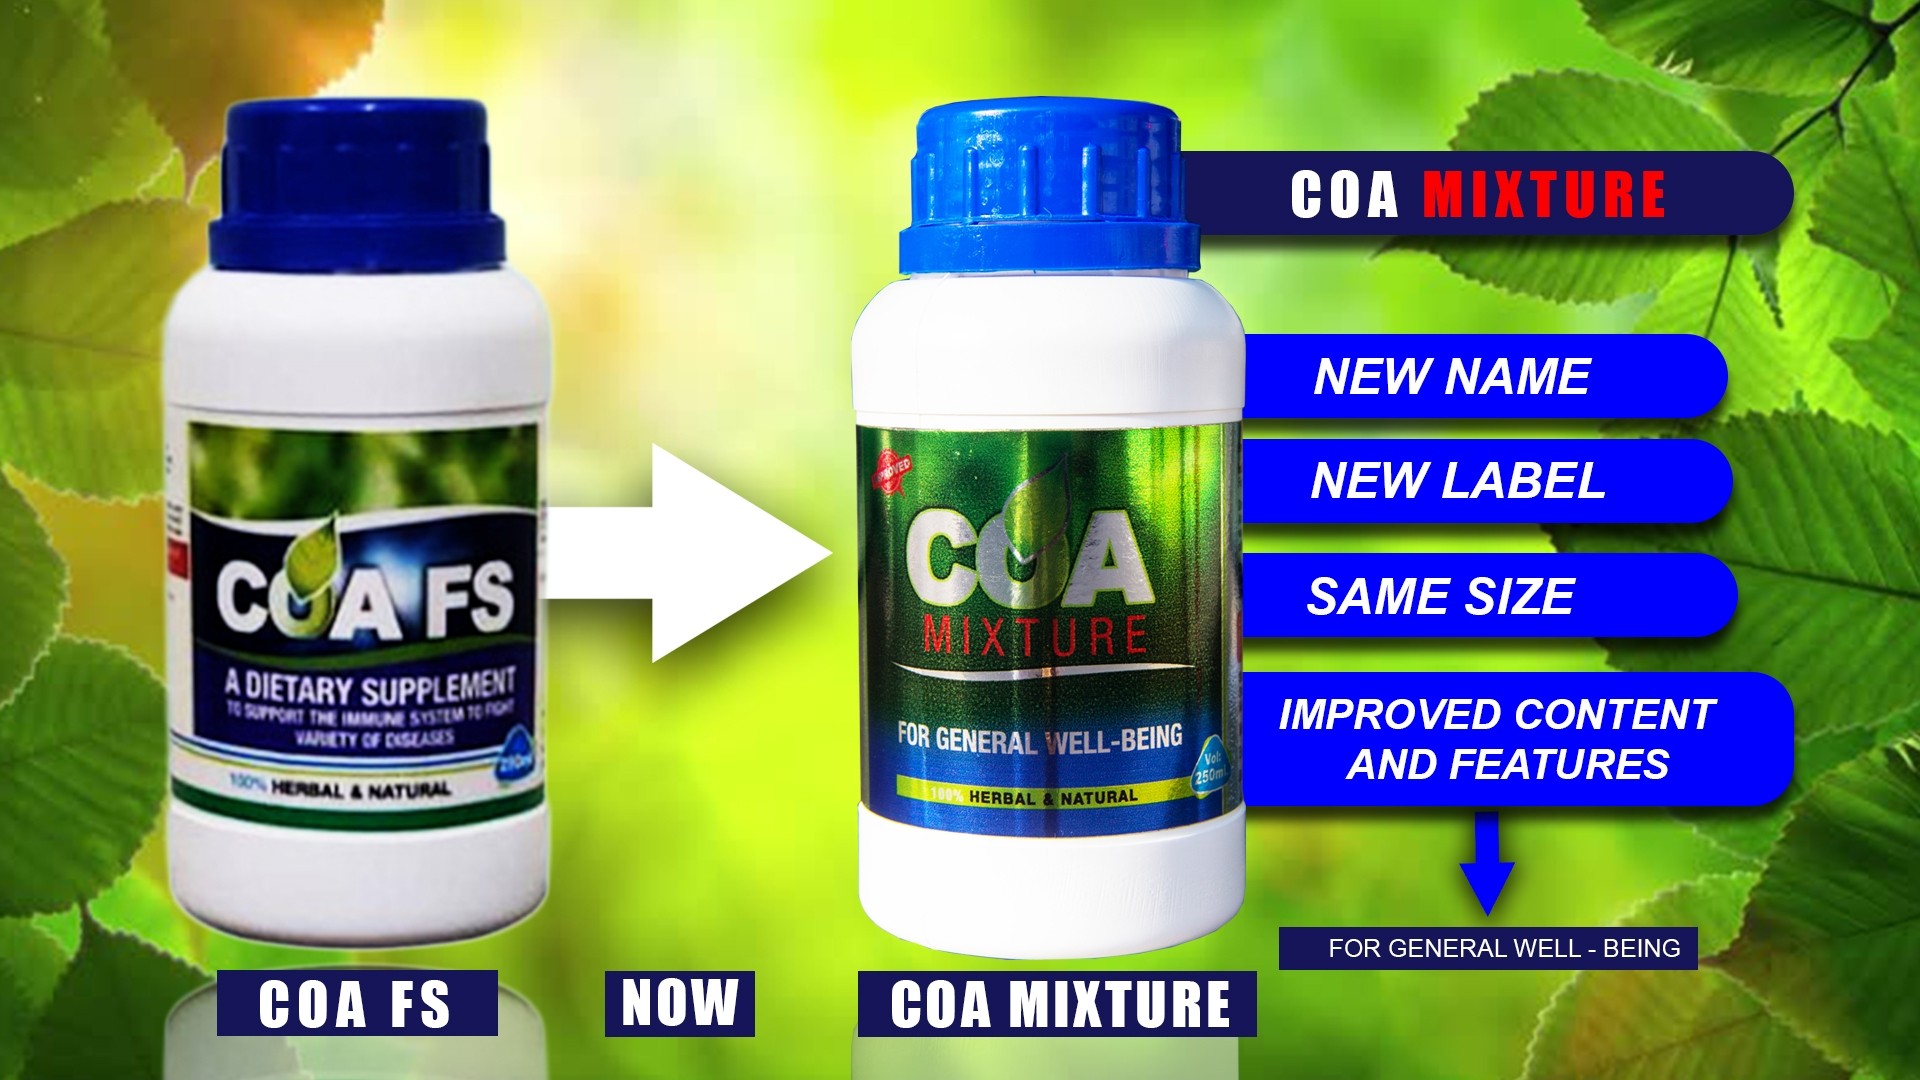 COA Mixture Launched (Watch Video)